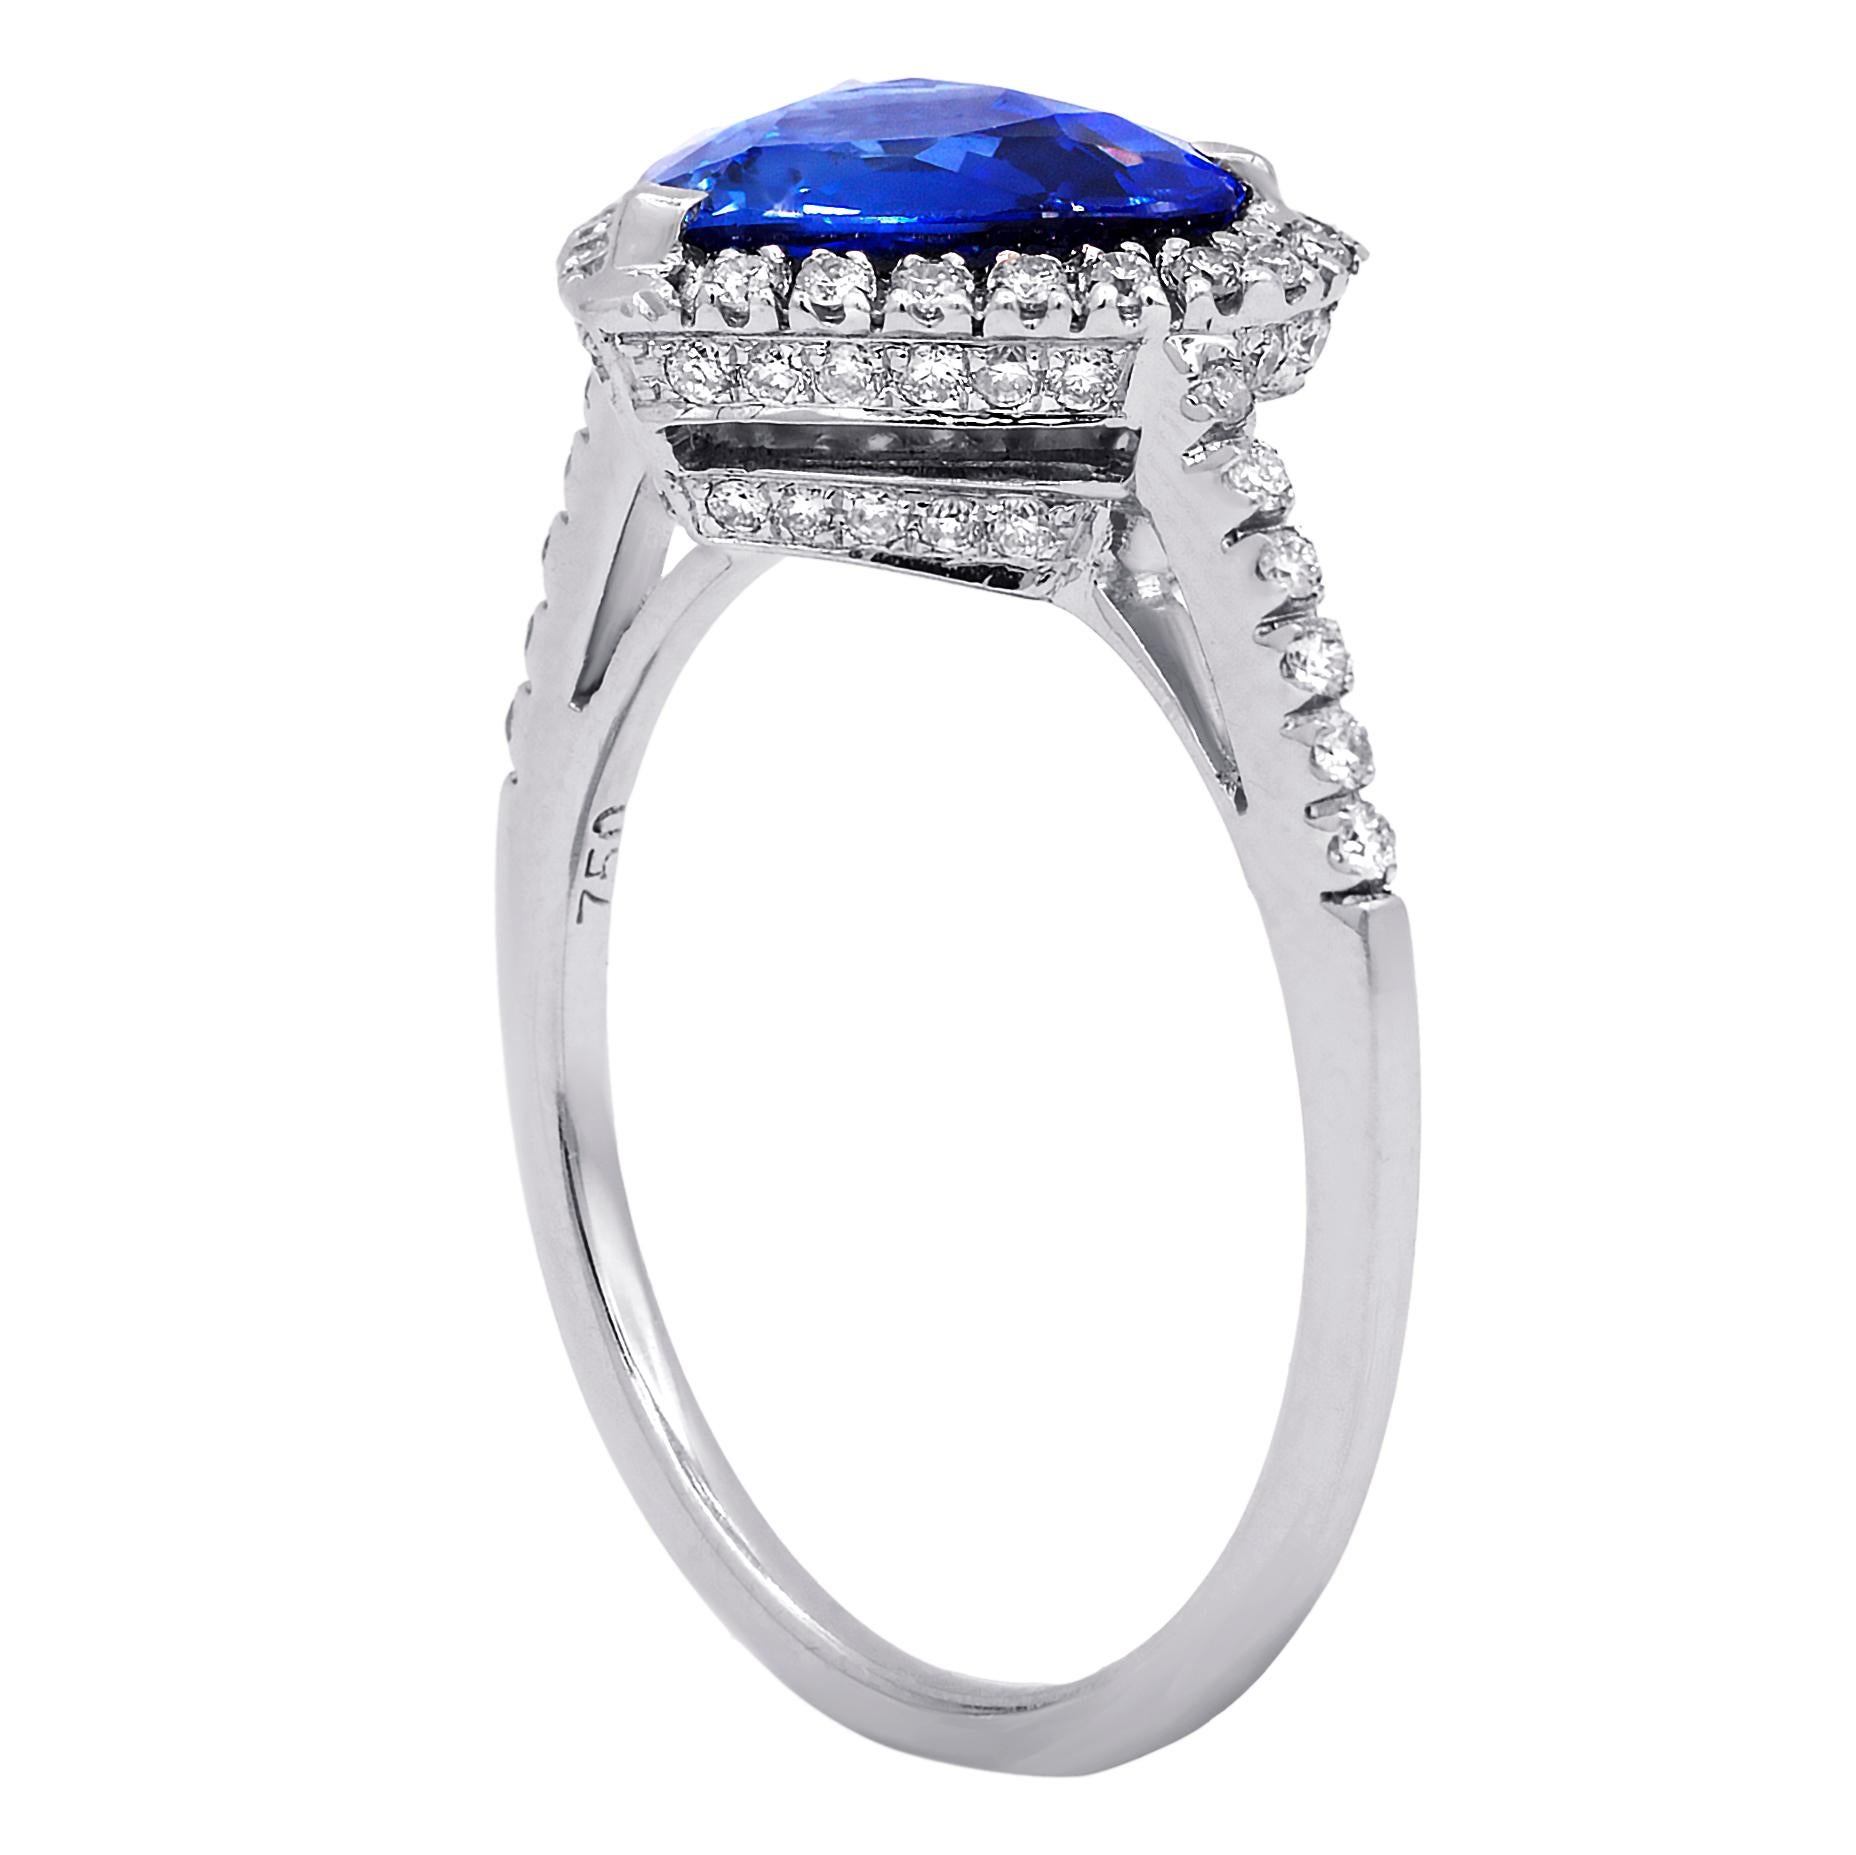 18kt white gold gia certified sapphire and diamond ring, the center stone is 3.00 carats heart shaped sapphire with 0.70 carats of diamonds in halo around the center stone. 
